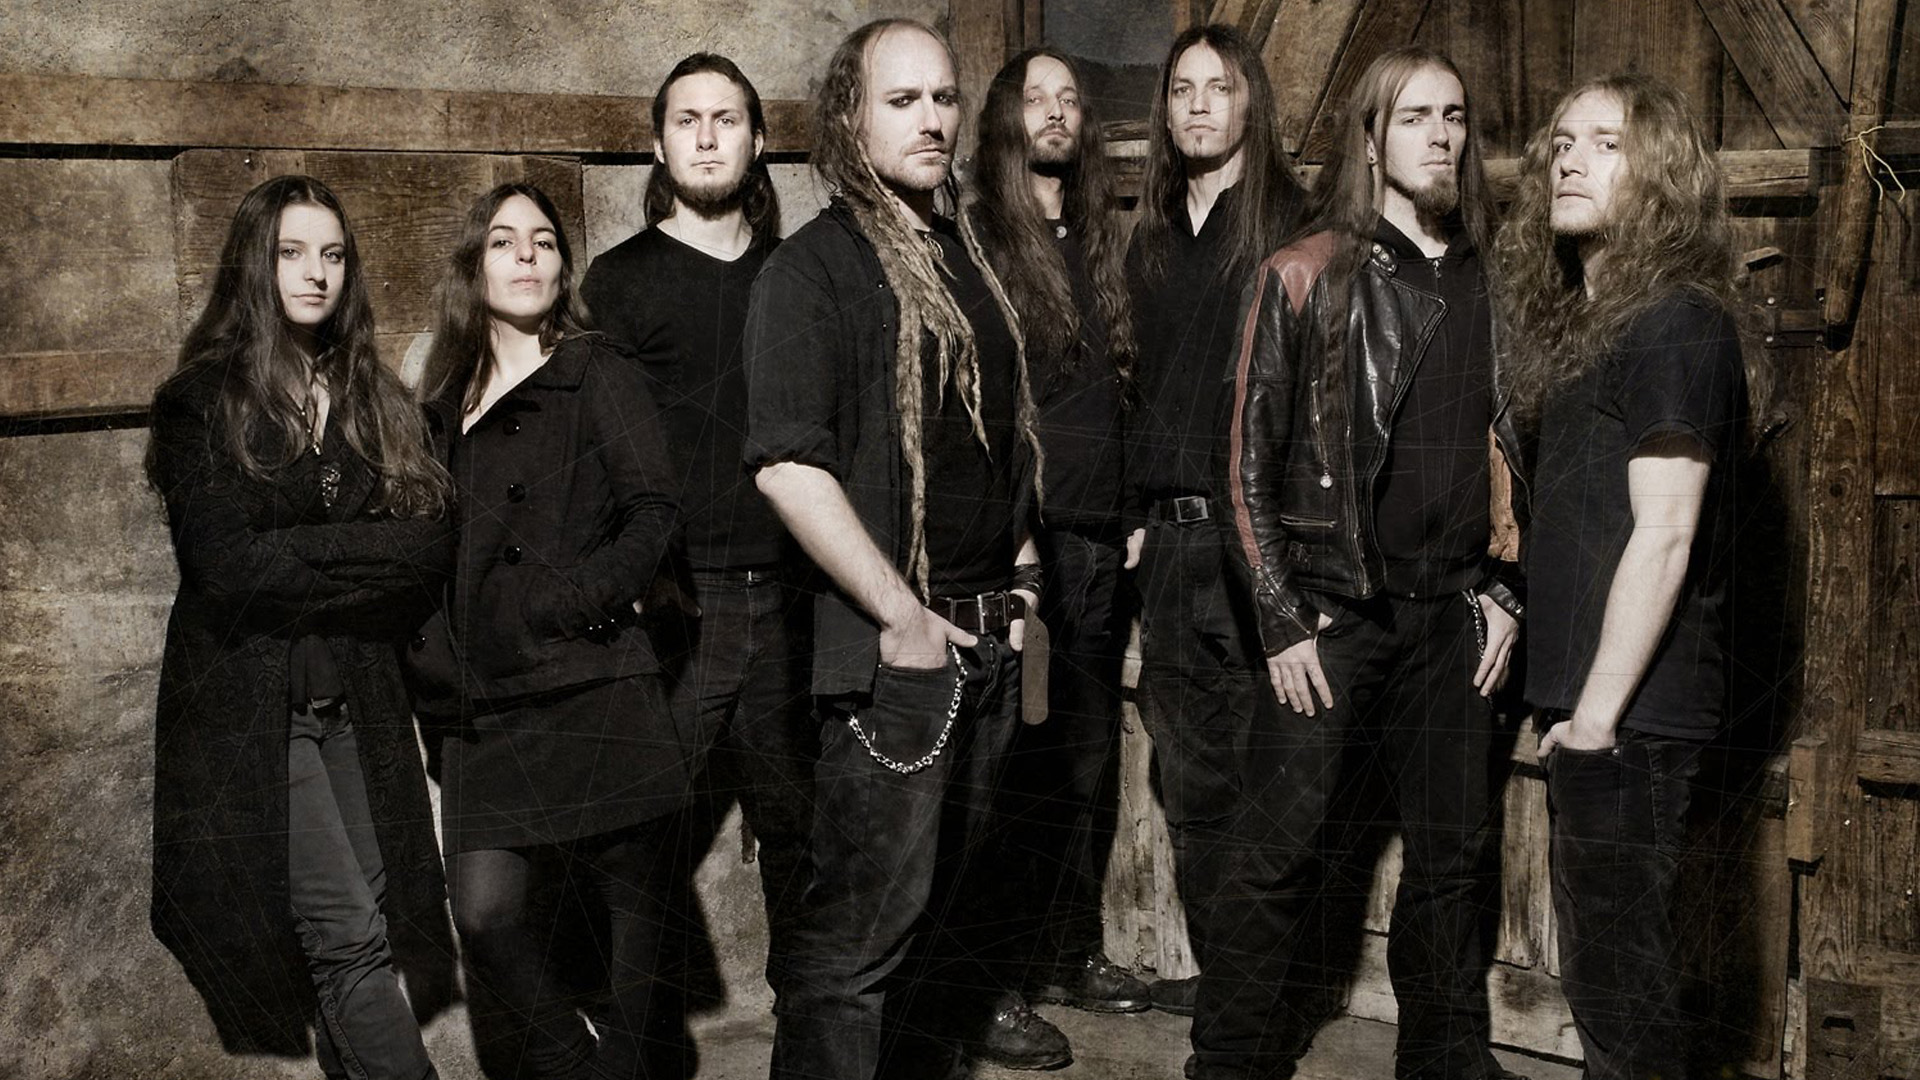 Everything Remains As It Never Was av Eluveitie